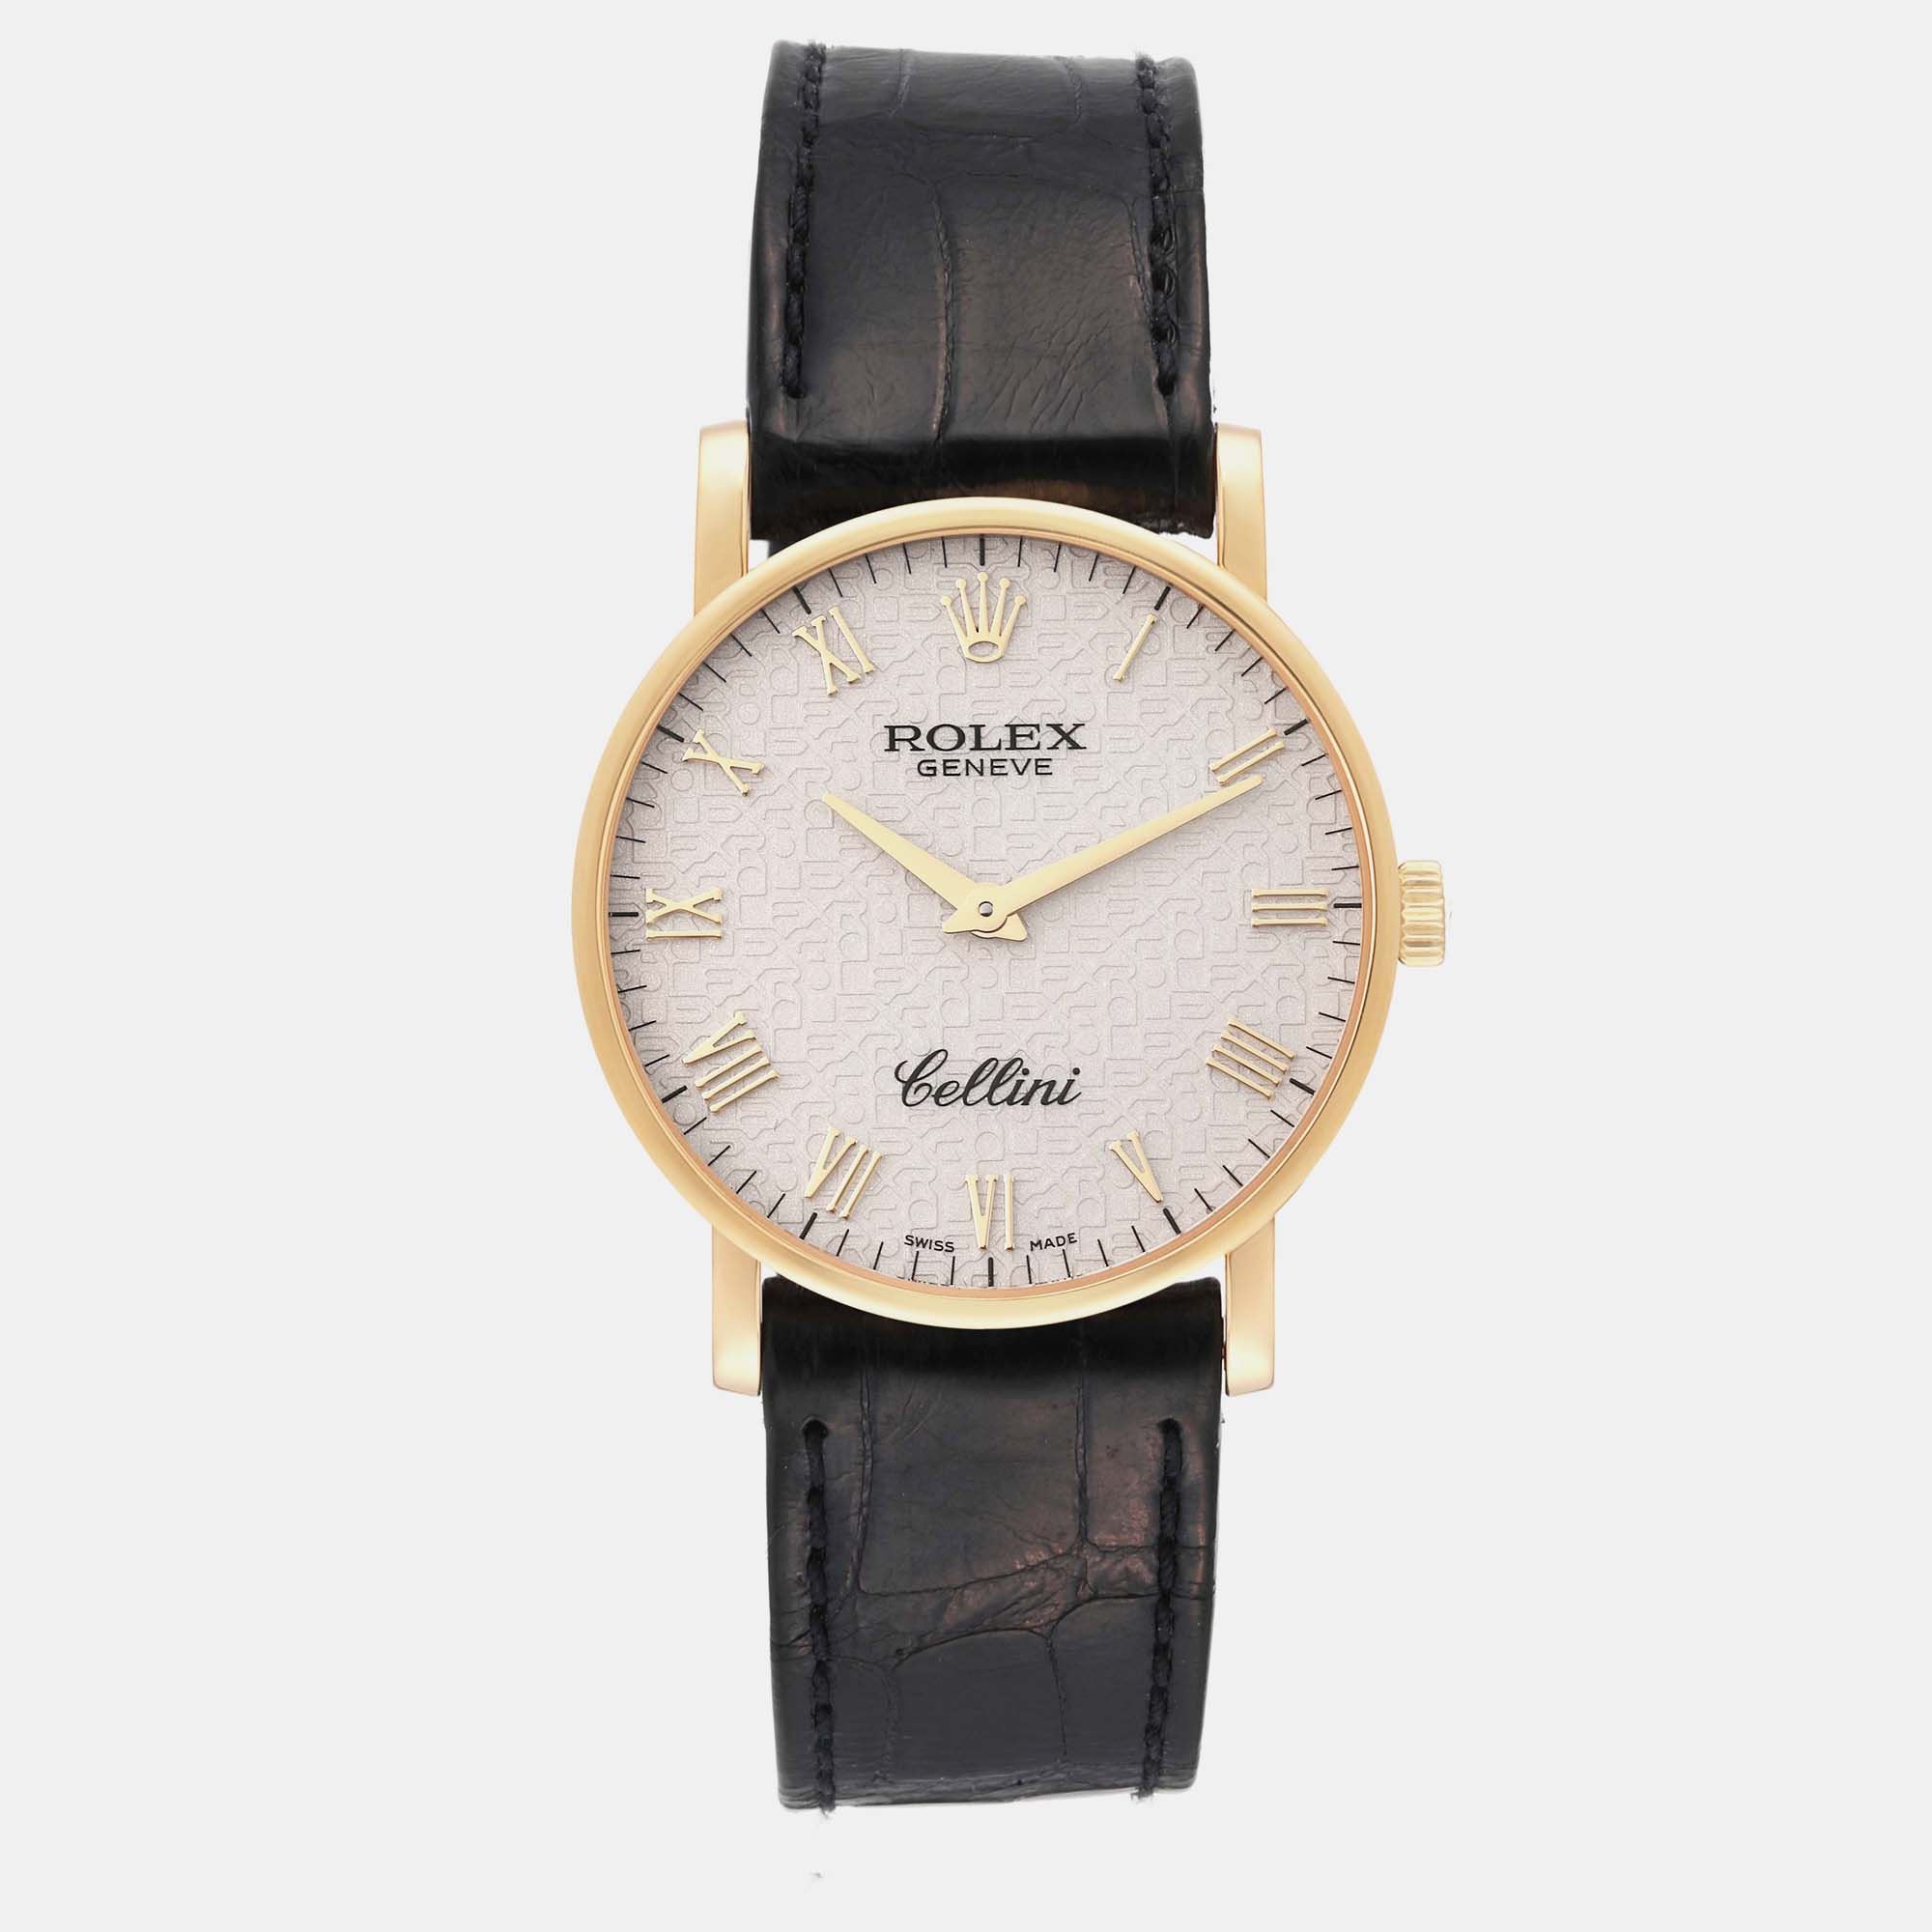 

Rolex Cellini Classic Yellow Gold Ivory Anniversary Dial Mens Watch 5115 32 mm, Cream